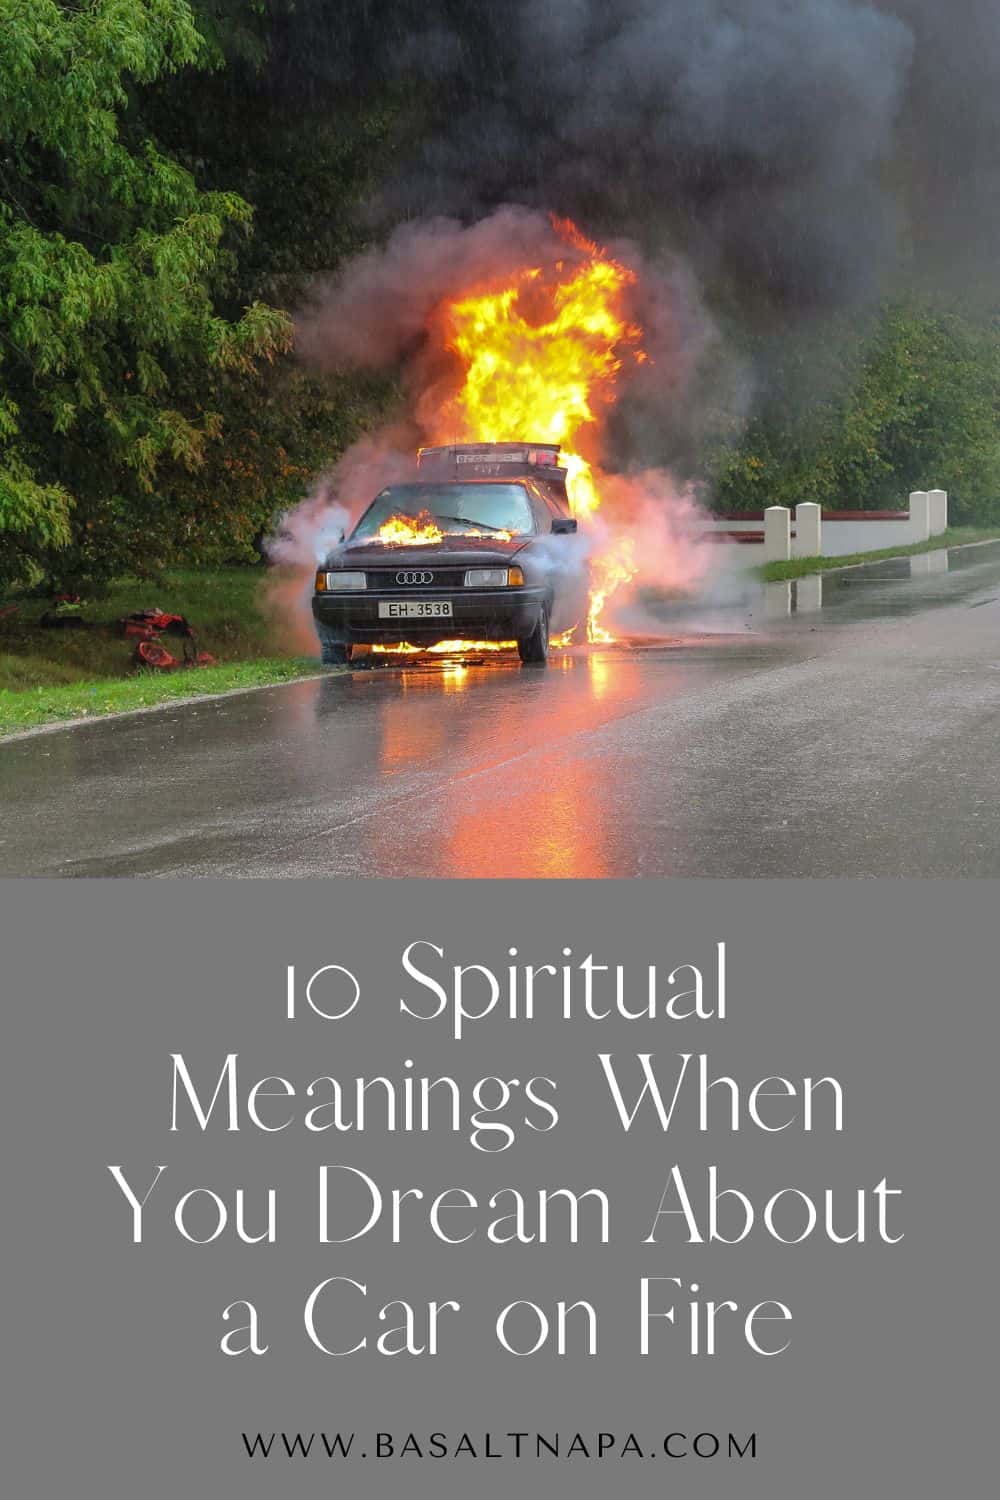 10 Spiritual Meanings When You Dream About a Car on Fire